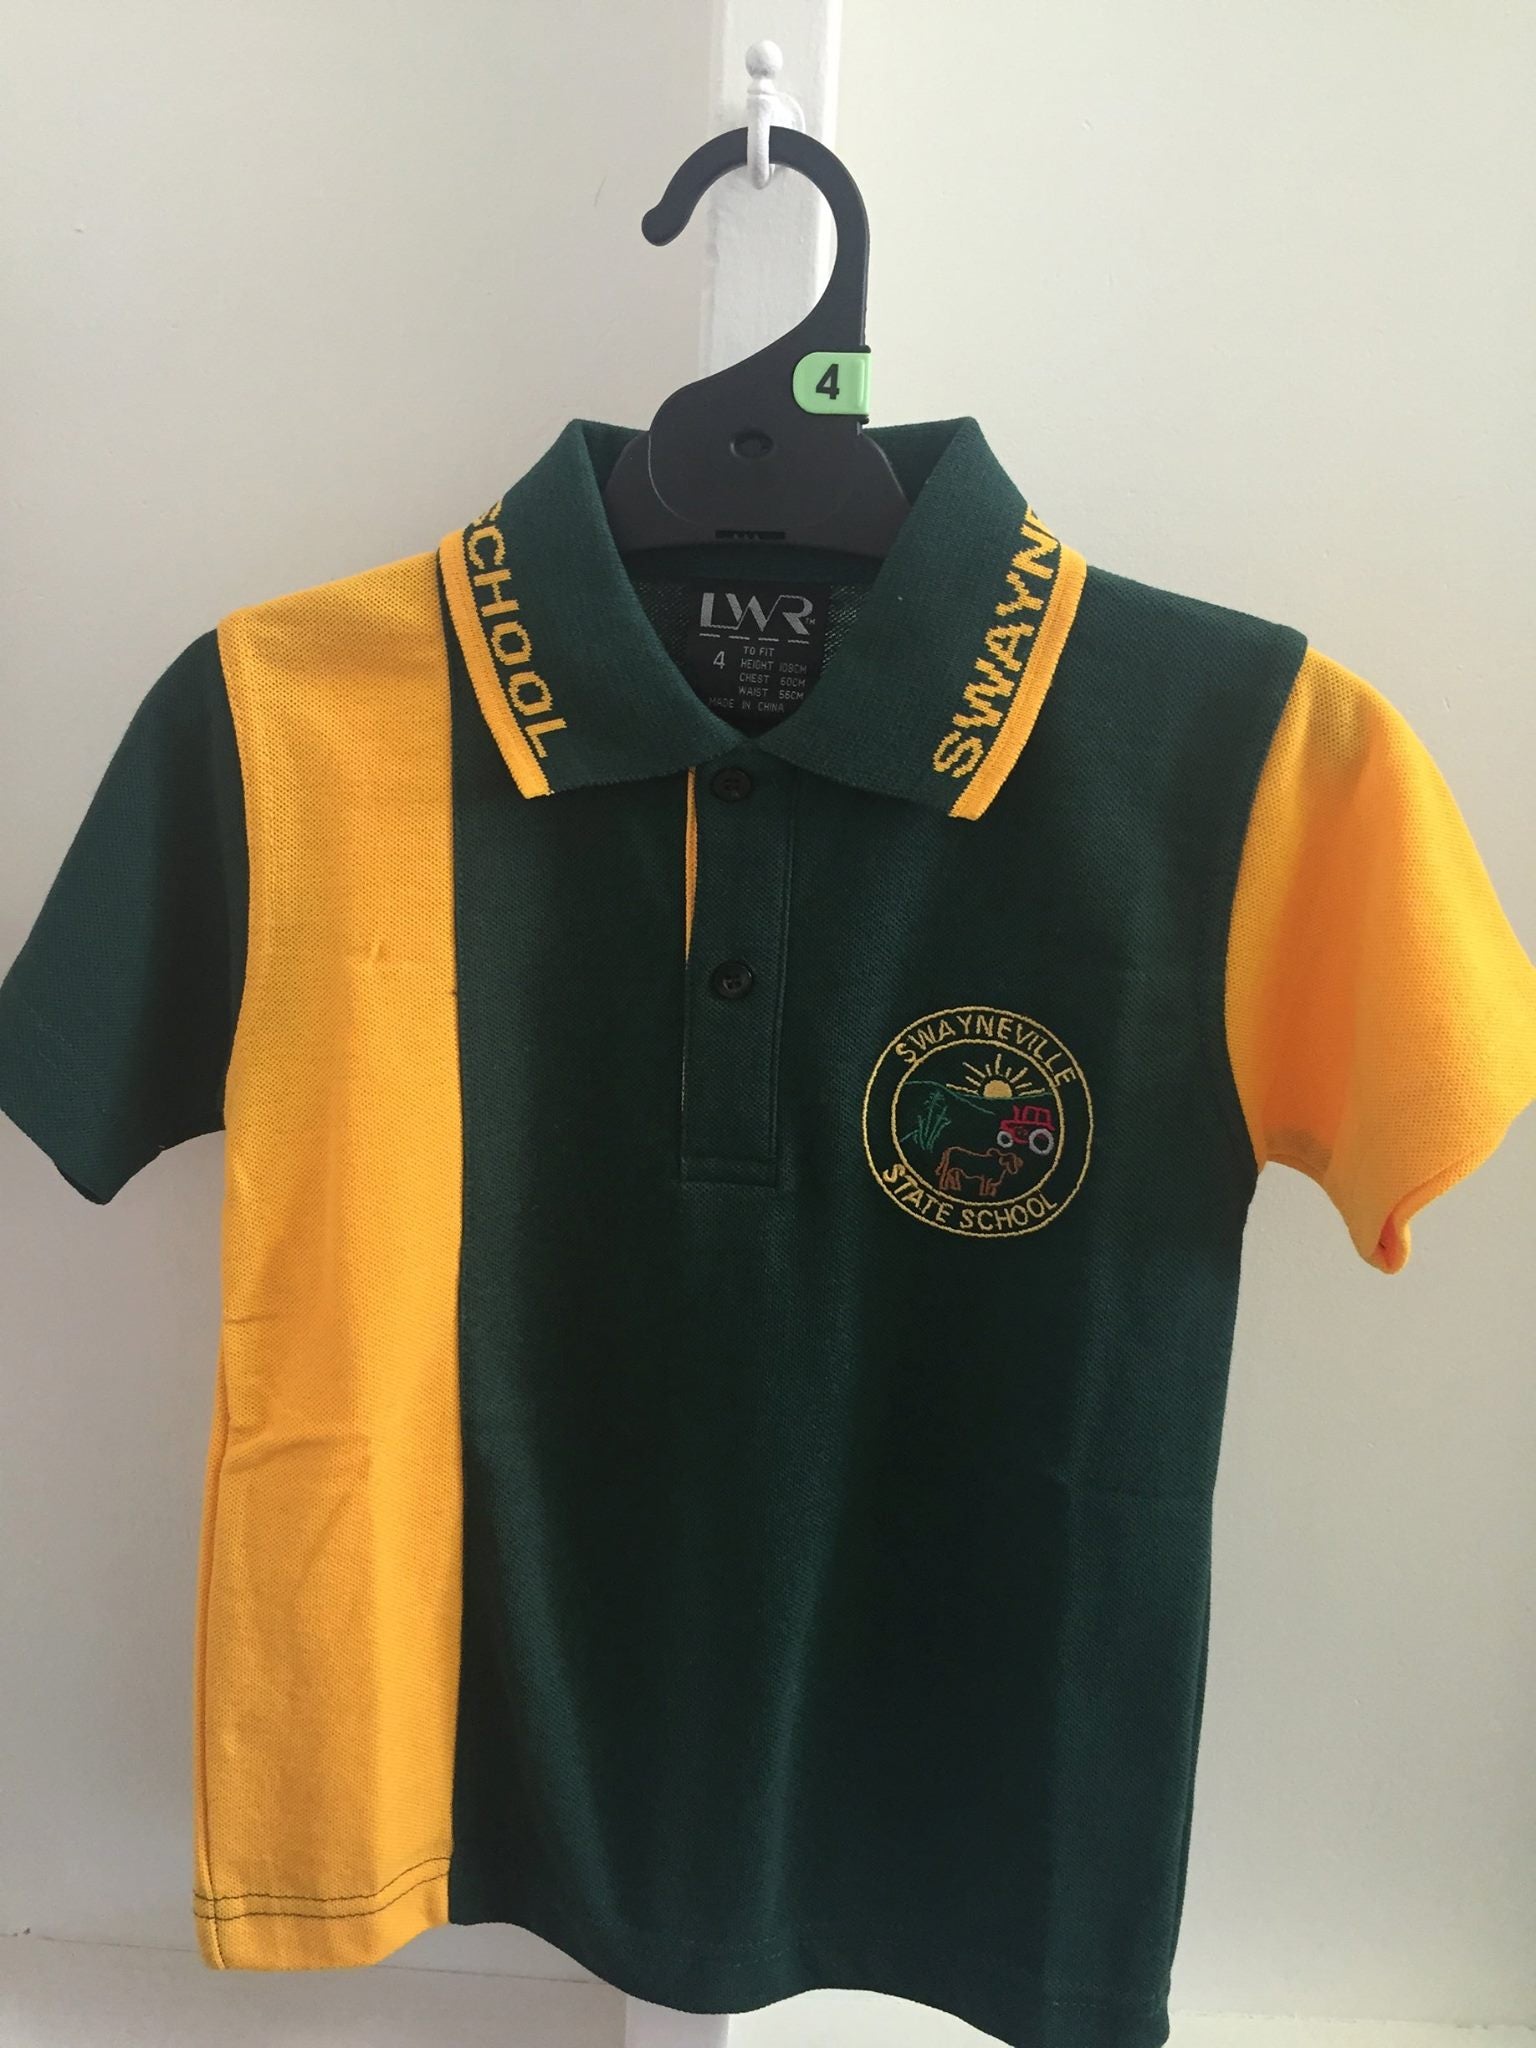 SWAYNEVILLE STATE SCHOOL POLO SHIRT